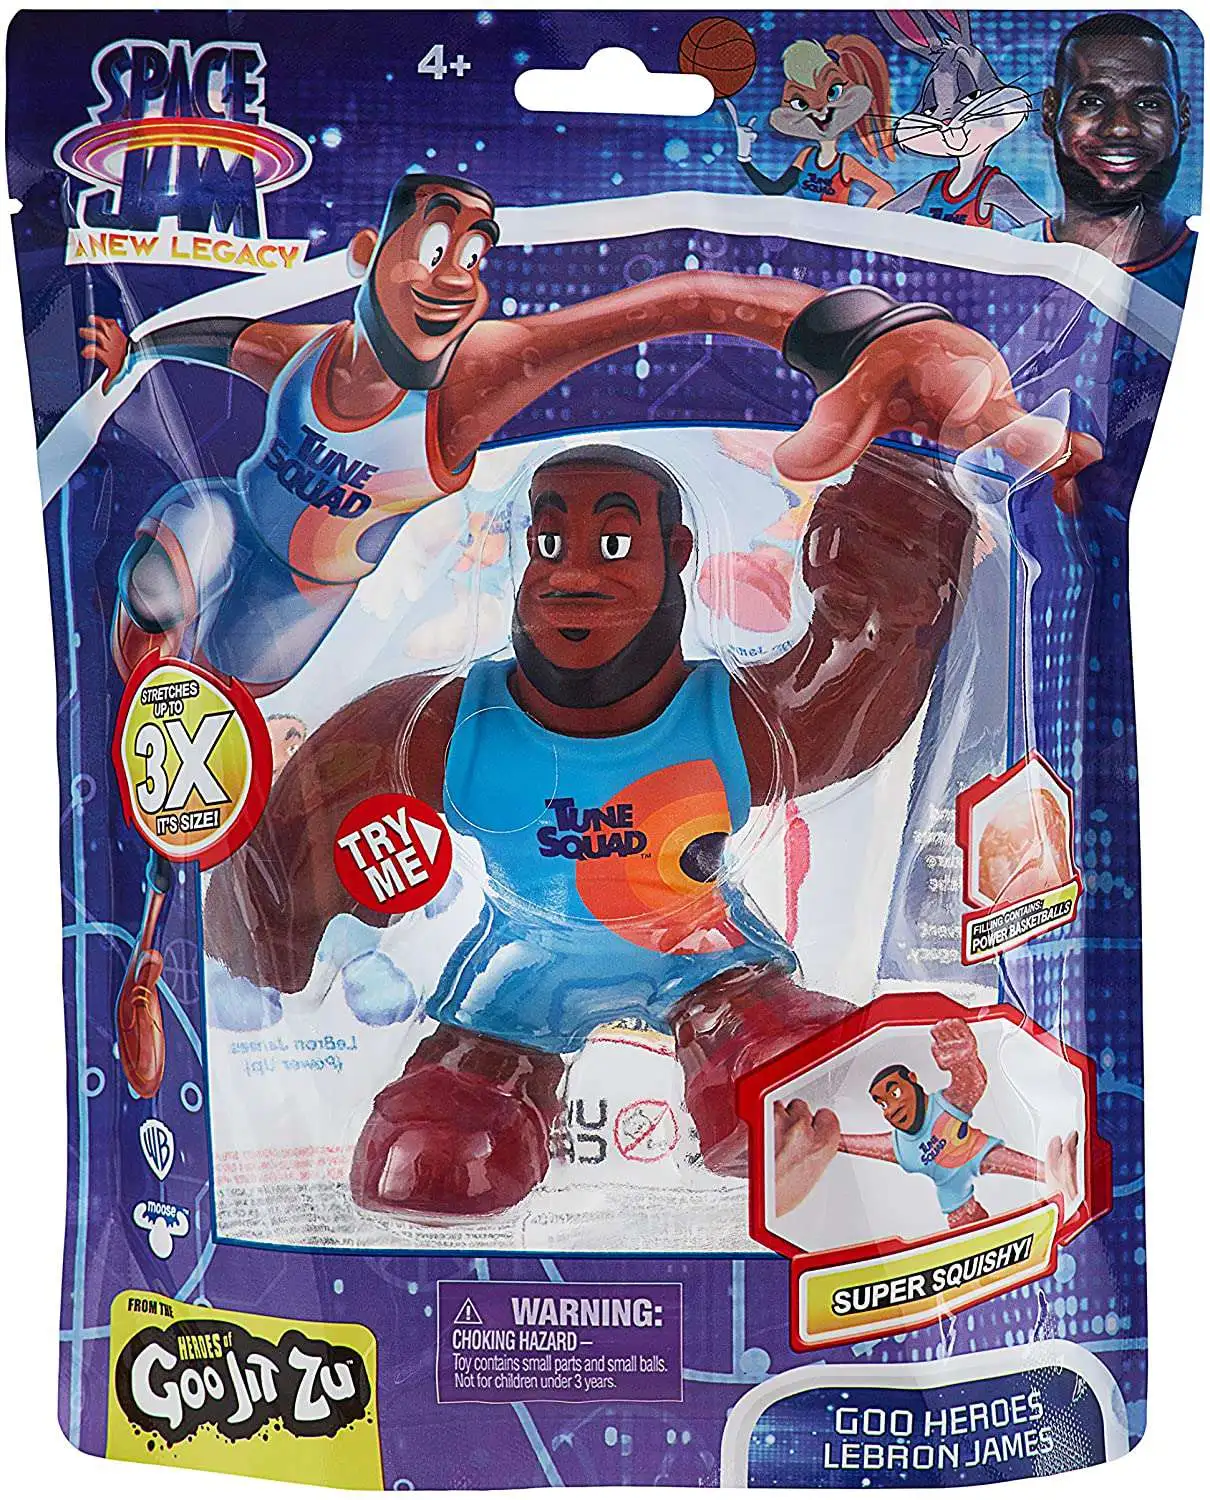 Moose Toys Space Jam: A New Legacy - Lebron James Tune Squad 12